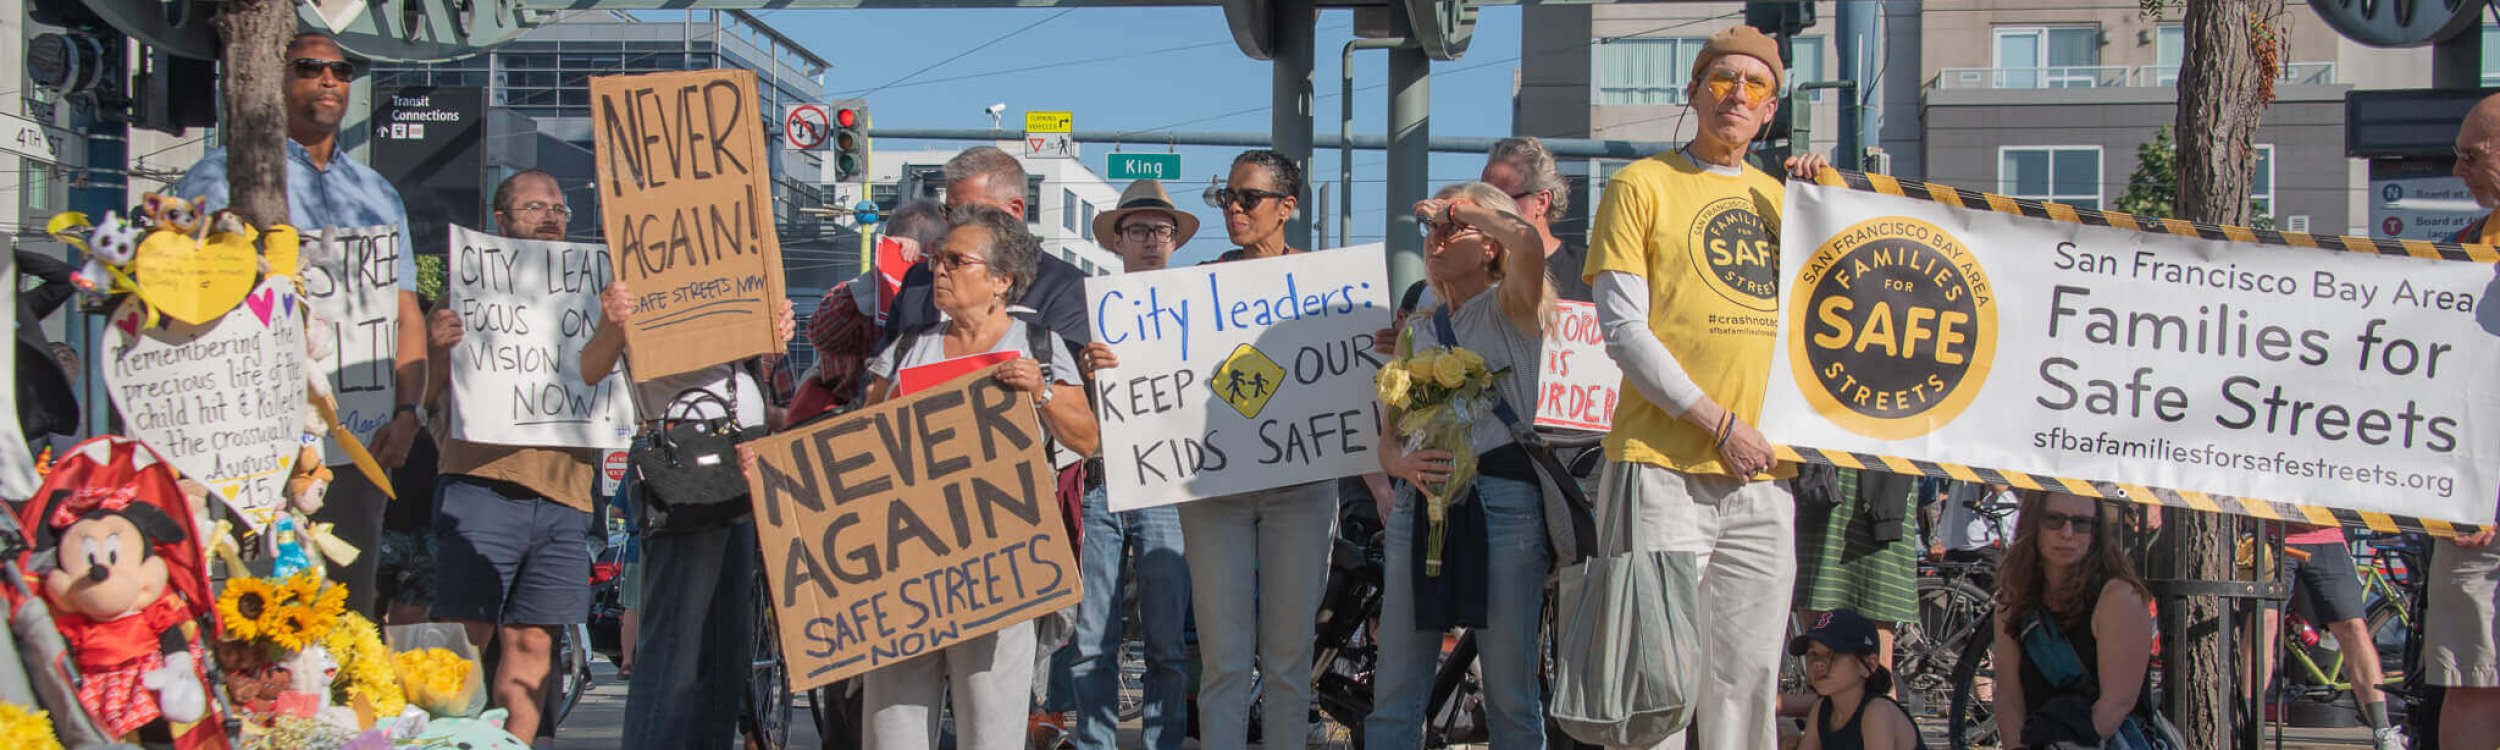 Demand the City fix deadly intersections by giving public comment at upcoming meetings